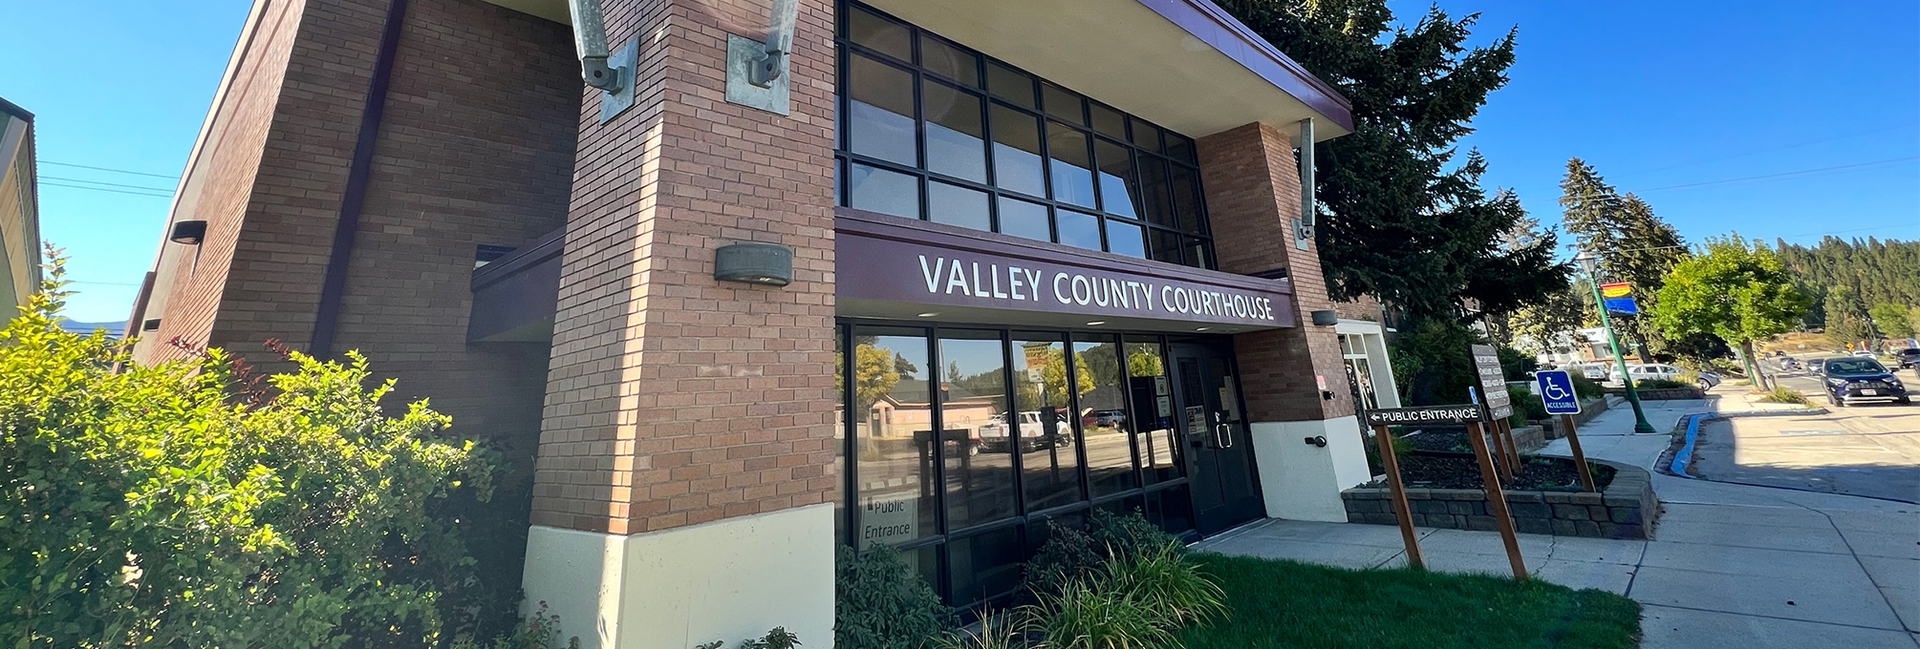 Official Website of Valley County, Idaho - News